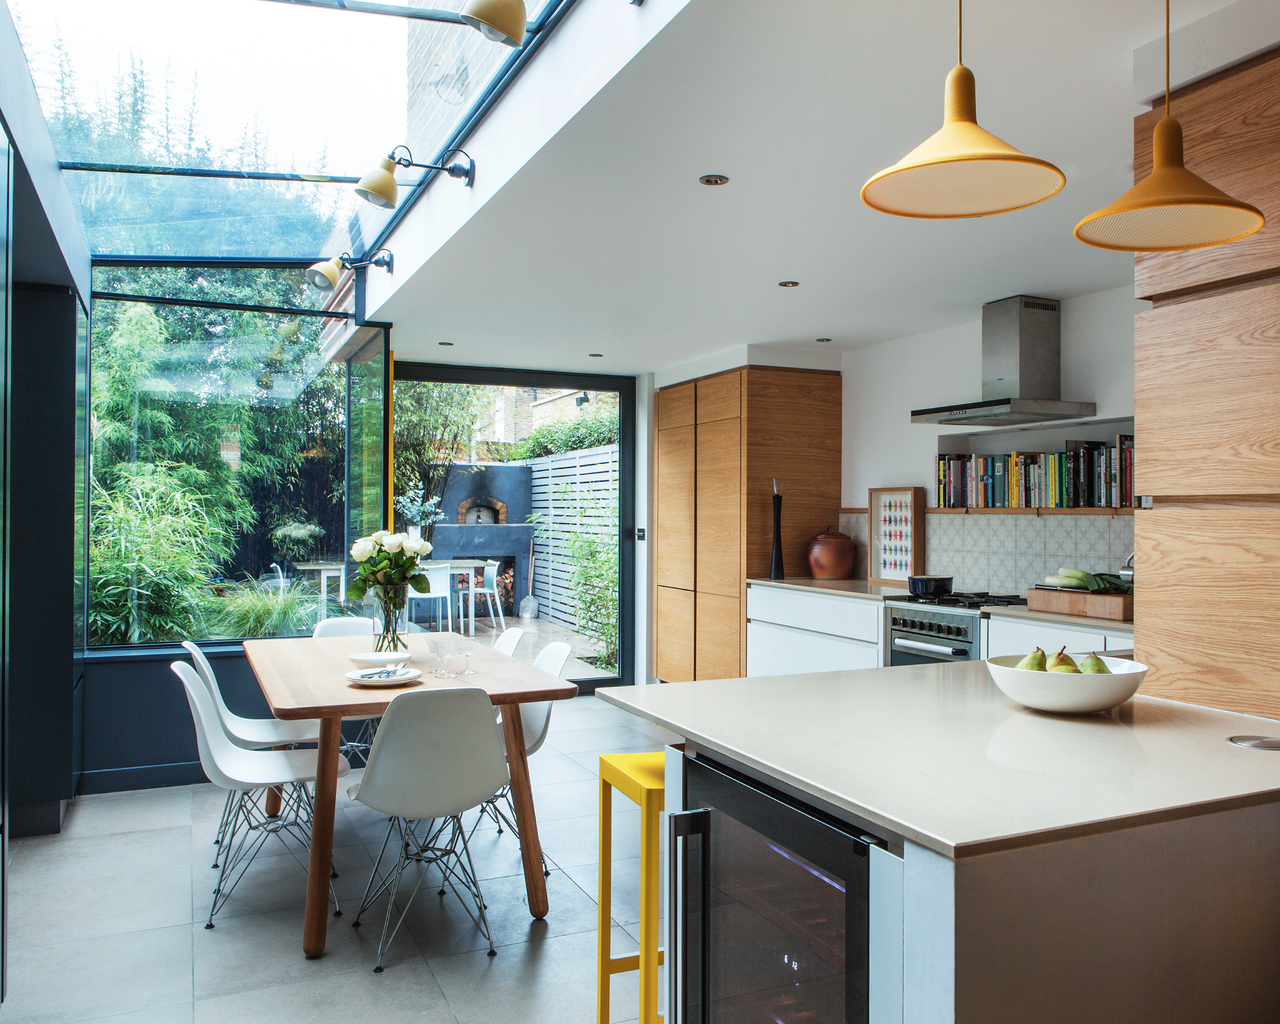 Kitchen extension ideas: Inspiration and design advice | Homes & Gardens